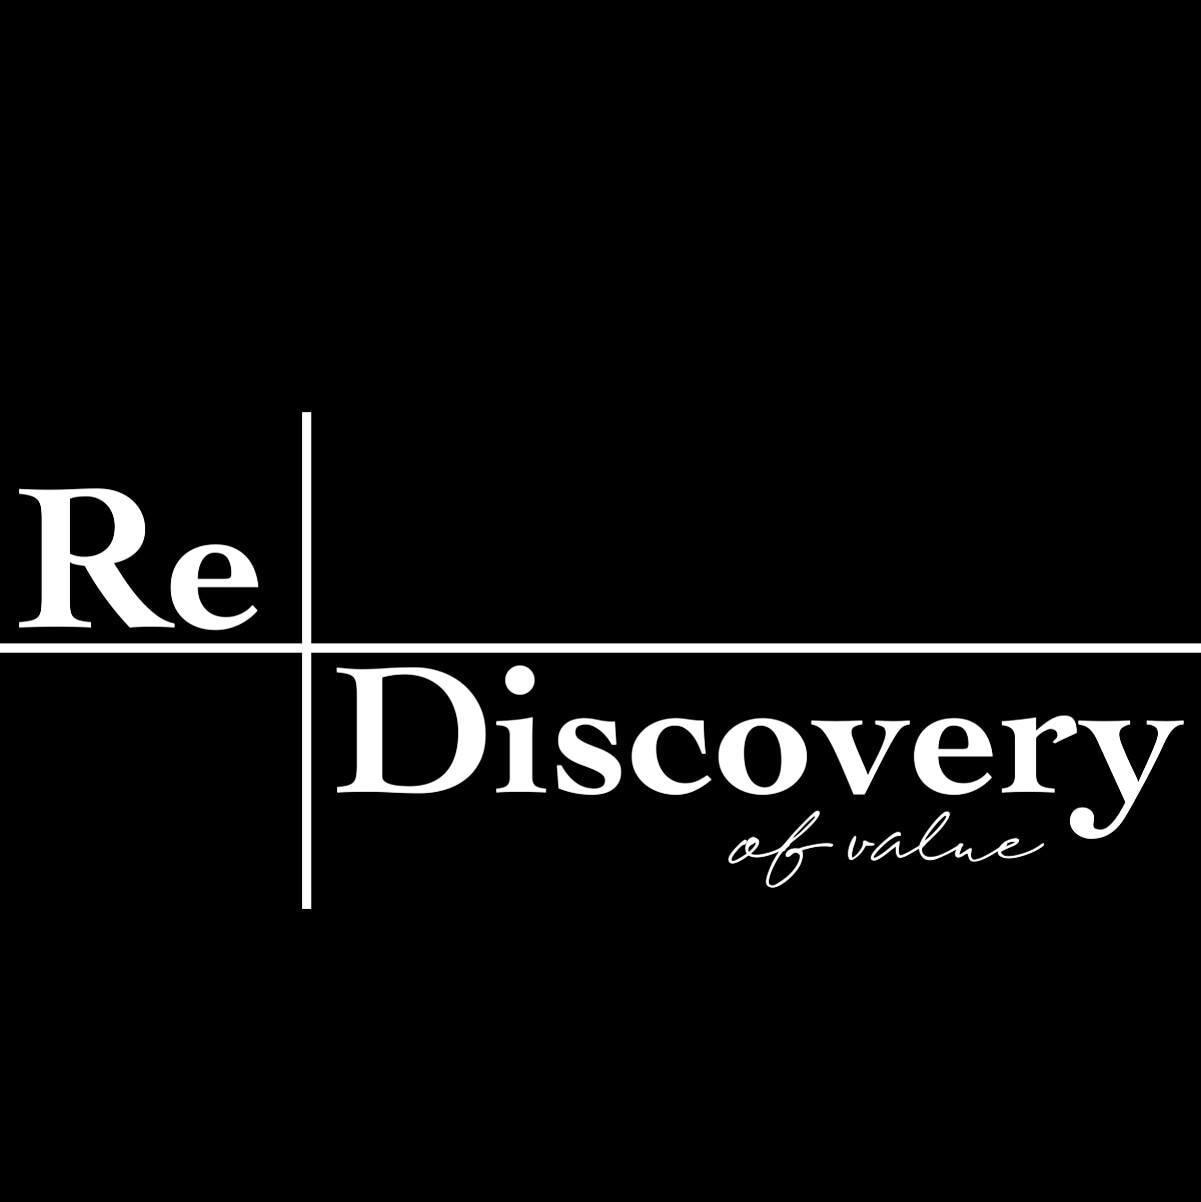 Re+Discovery